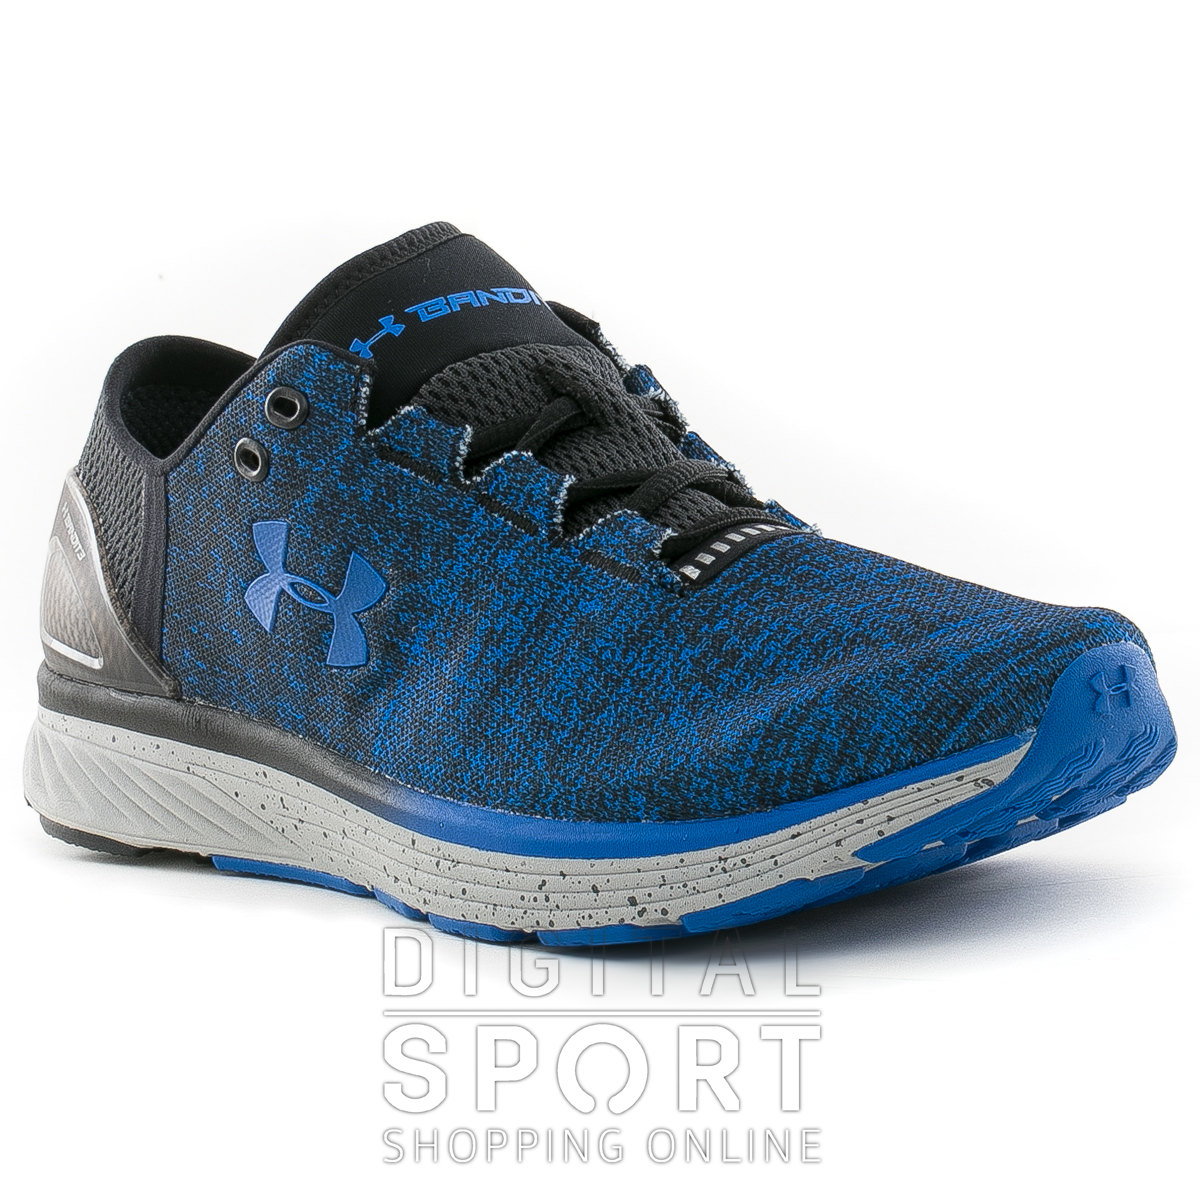 ZAPATILLAS CHARGED BANDIT 3 UNDER ARMOUR | DIGITAL SPORT